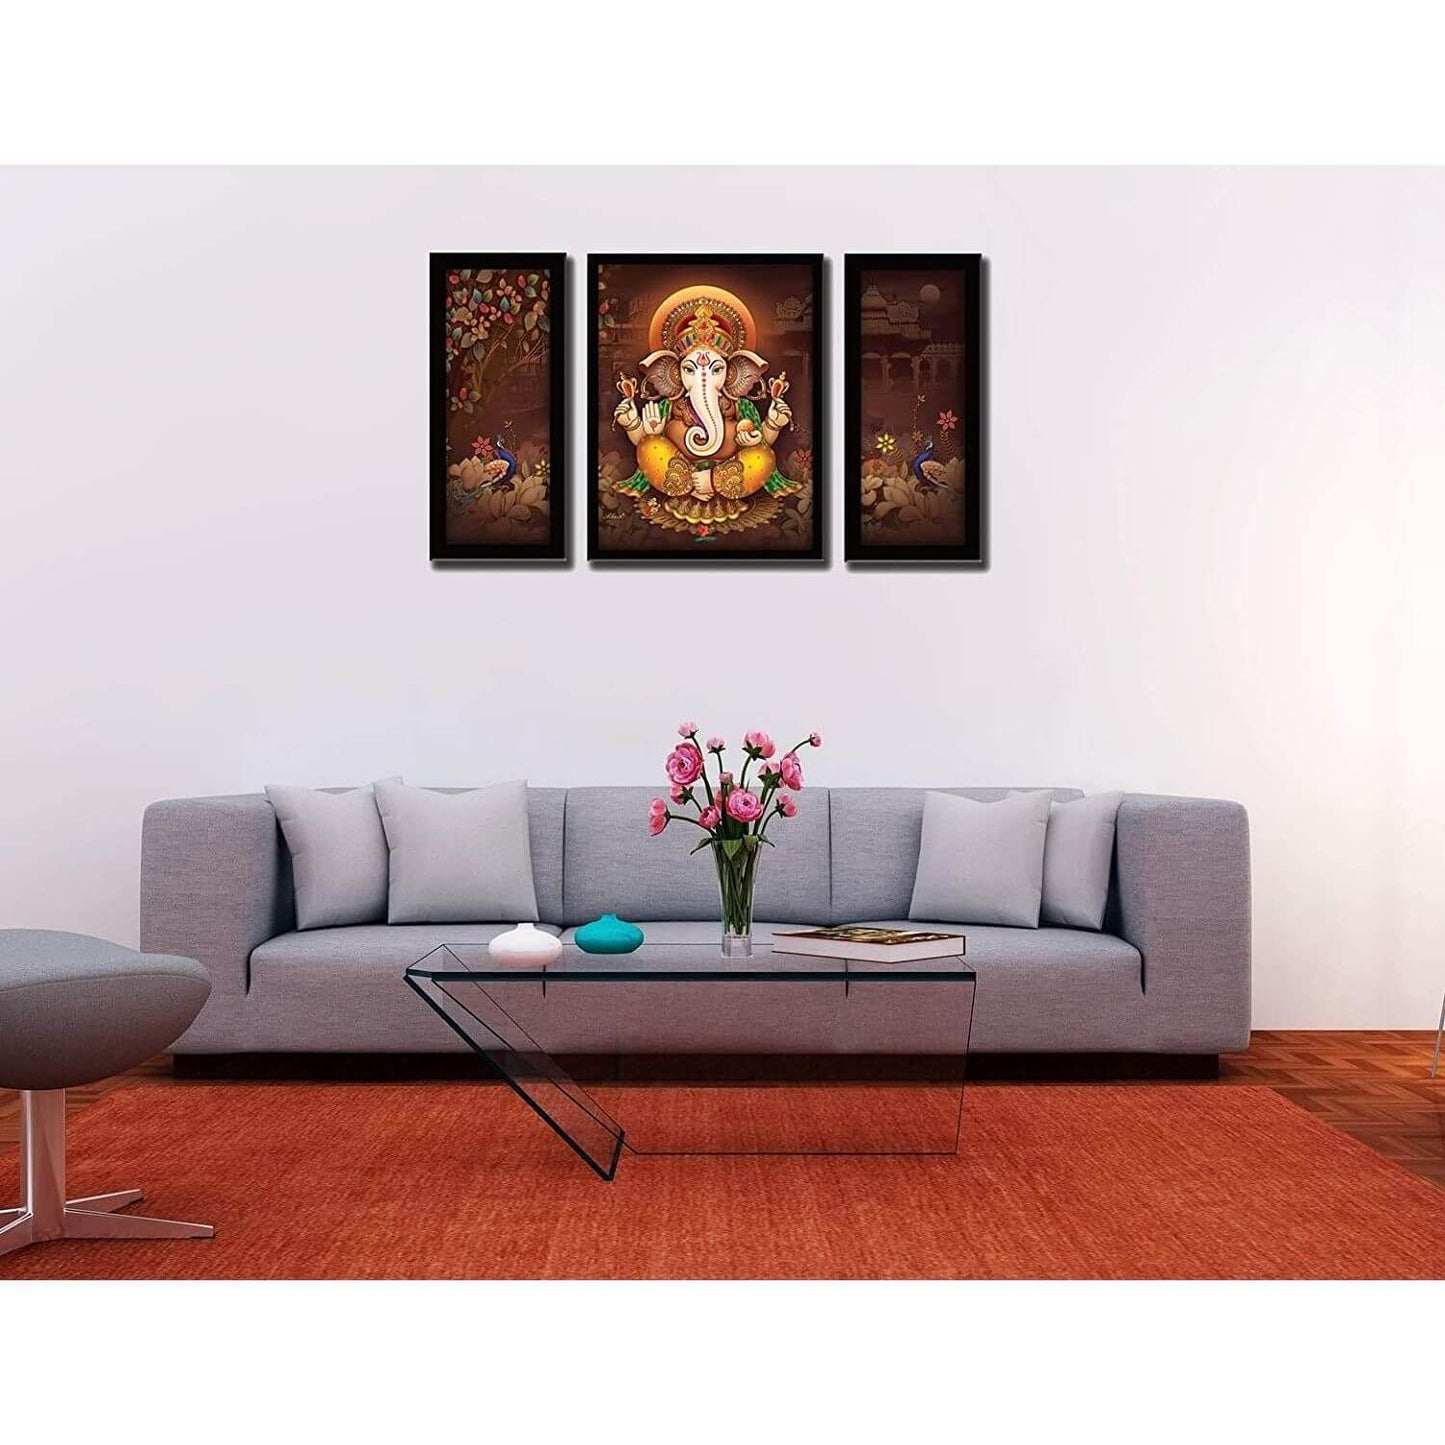 Ganesha Art Framed Painting | UV Textured | 3 Panel Painting | Ready to Hang- (Wood, 24 inch x 18 inch)